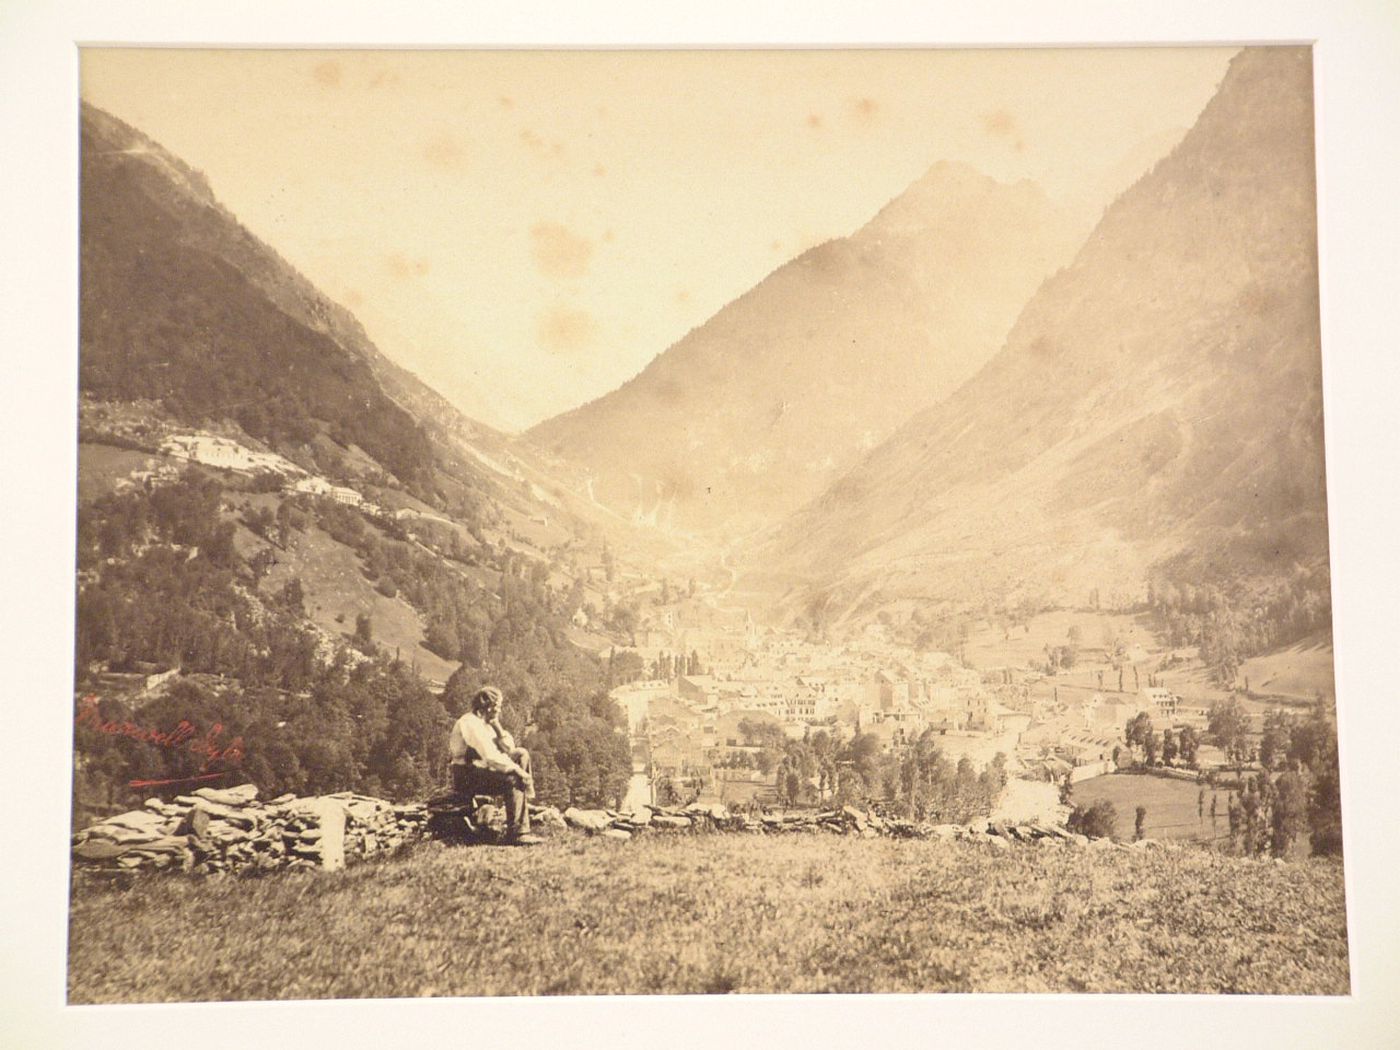 A seated figure over looking valley and towns, Cauterets, France